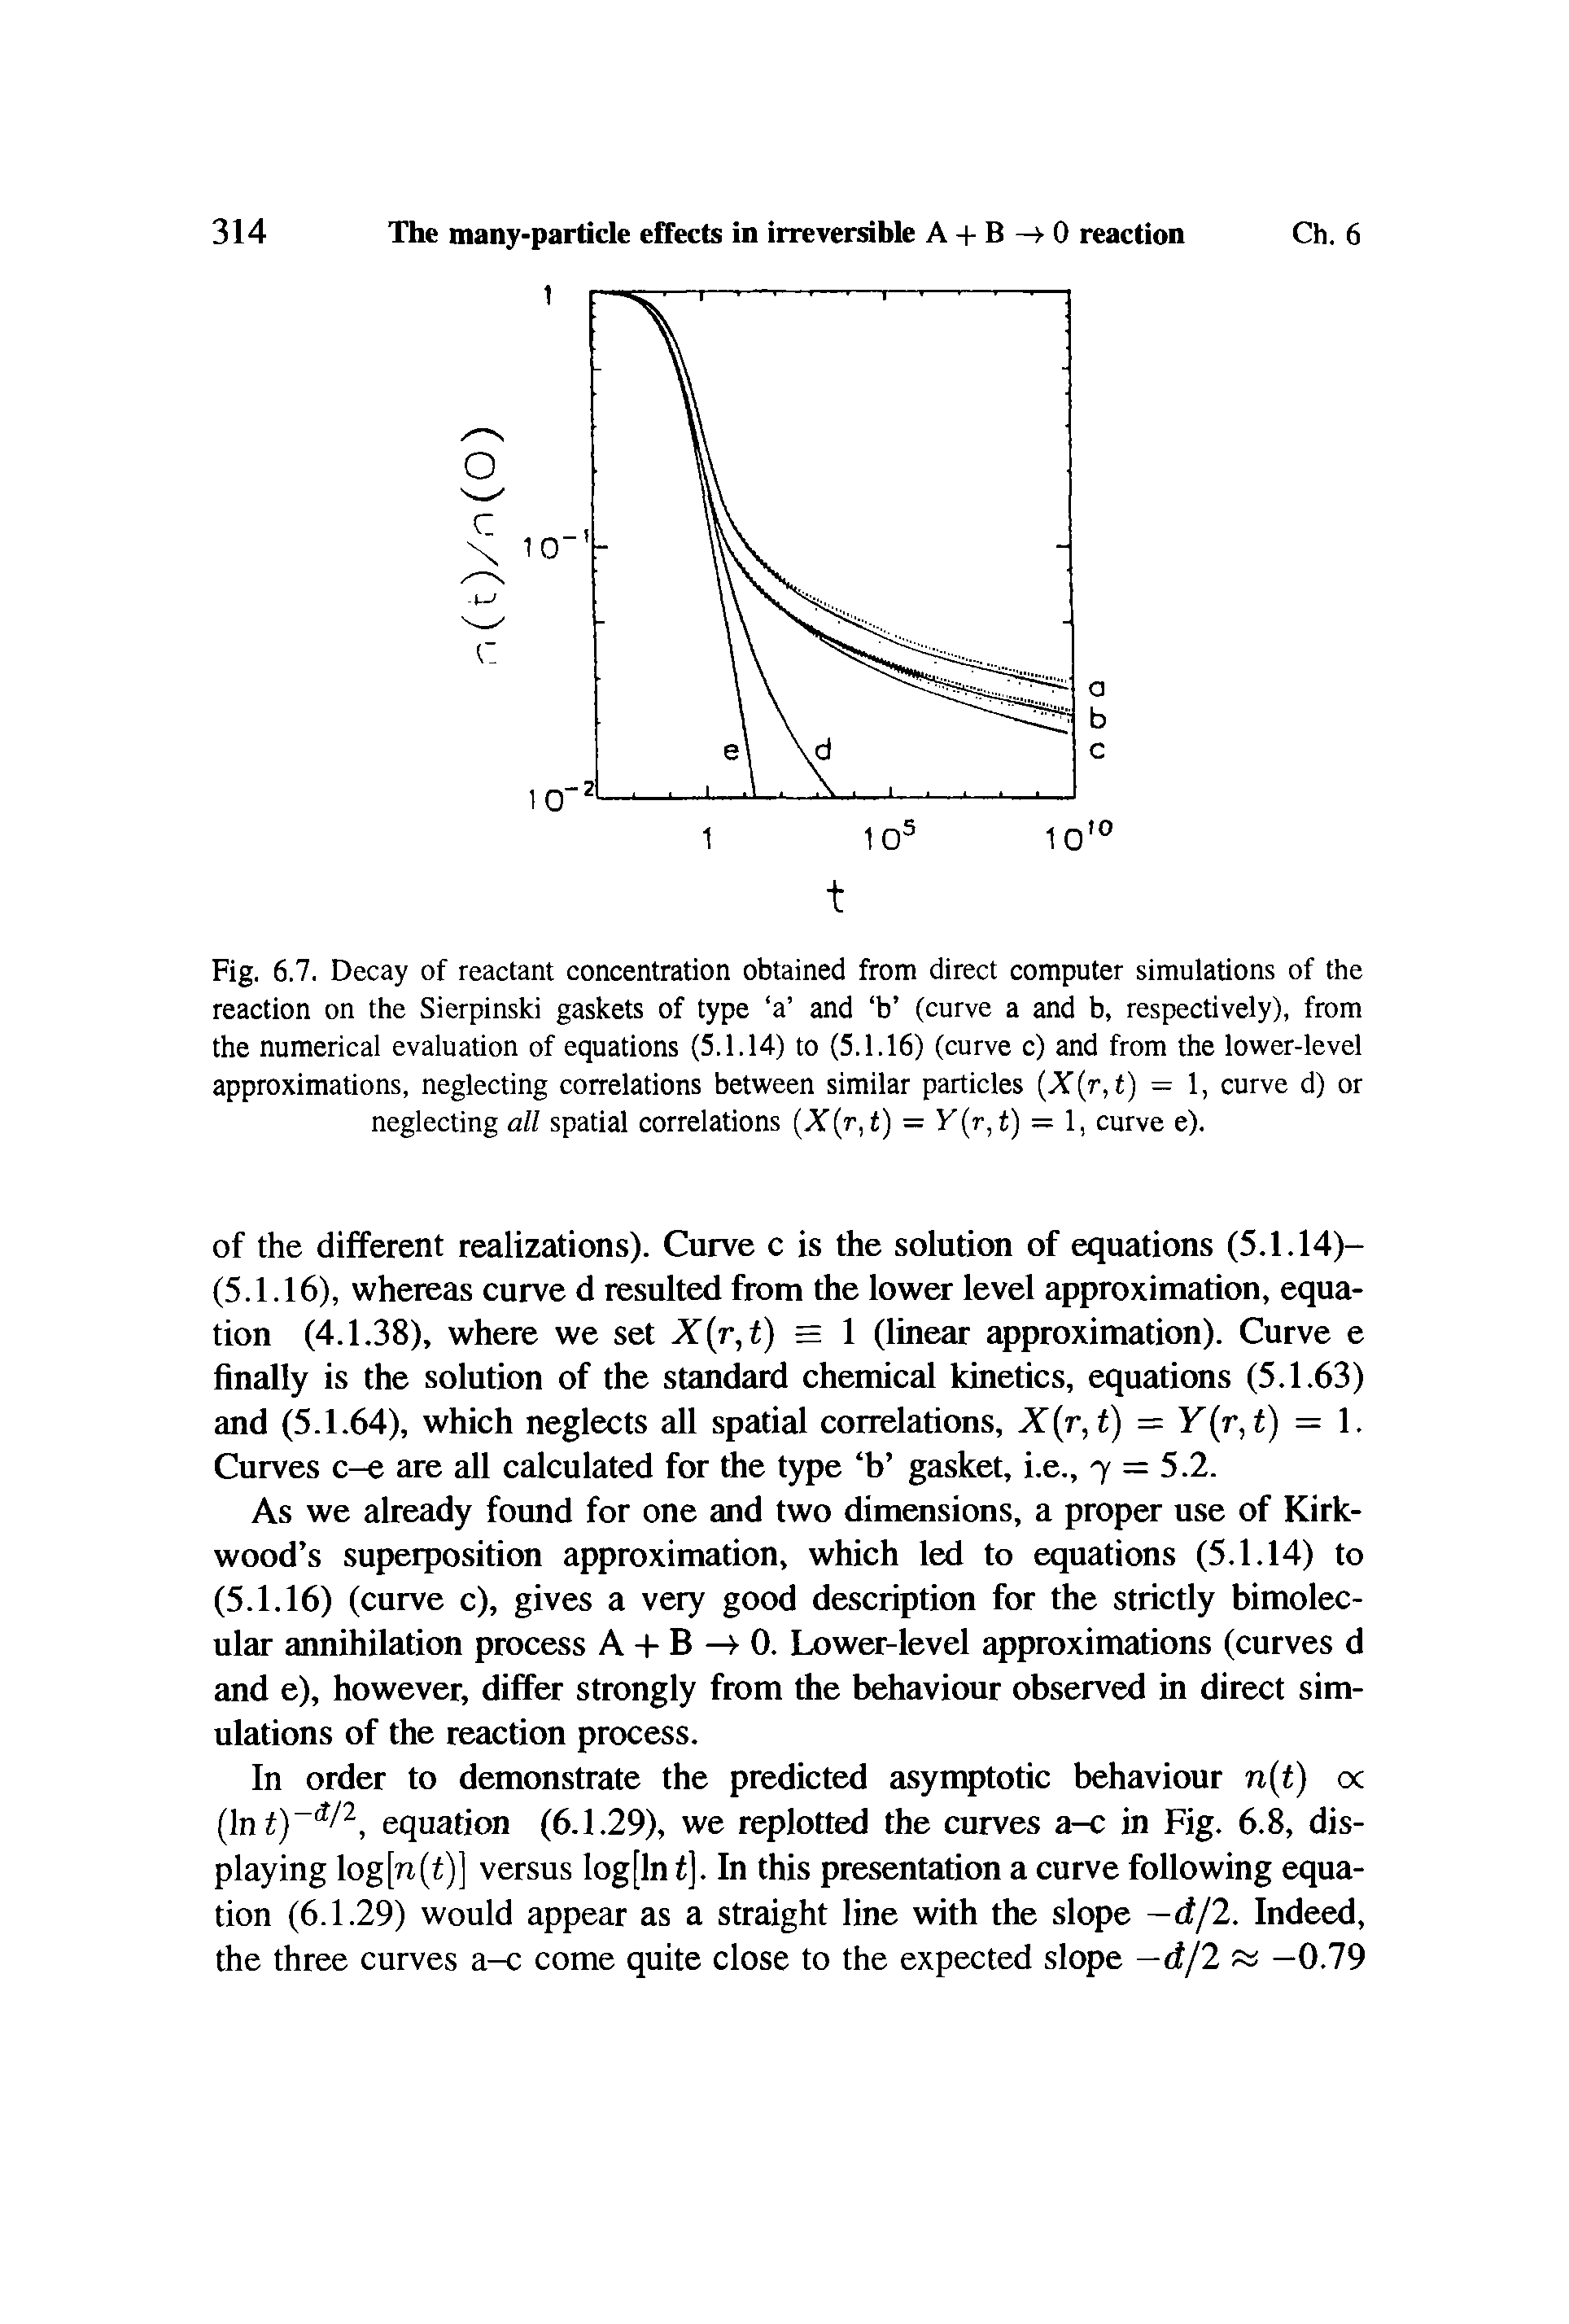 Fig. 6.7. Decay of reactant concentration obtained from direct computer simulations of the reaction on the Sierpinski gaskets of type a and b (curve a and b, respectively), from the numerical evaluation of equations (5.1.14) to (5.1.16) (curve c) and from the lower-level approximations, neglecting correlations between similar particles (X(r,t) = 1, curve d) or neglecting all spatial correlations (X(r,t) = Y(r, t) = 1, curve e).